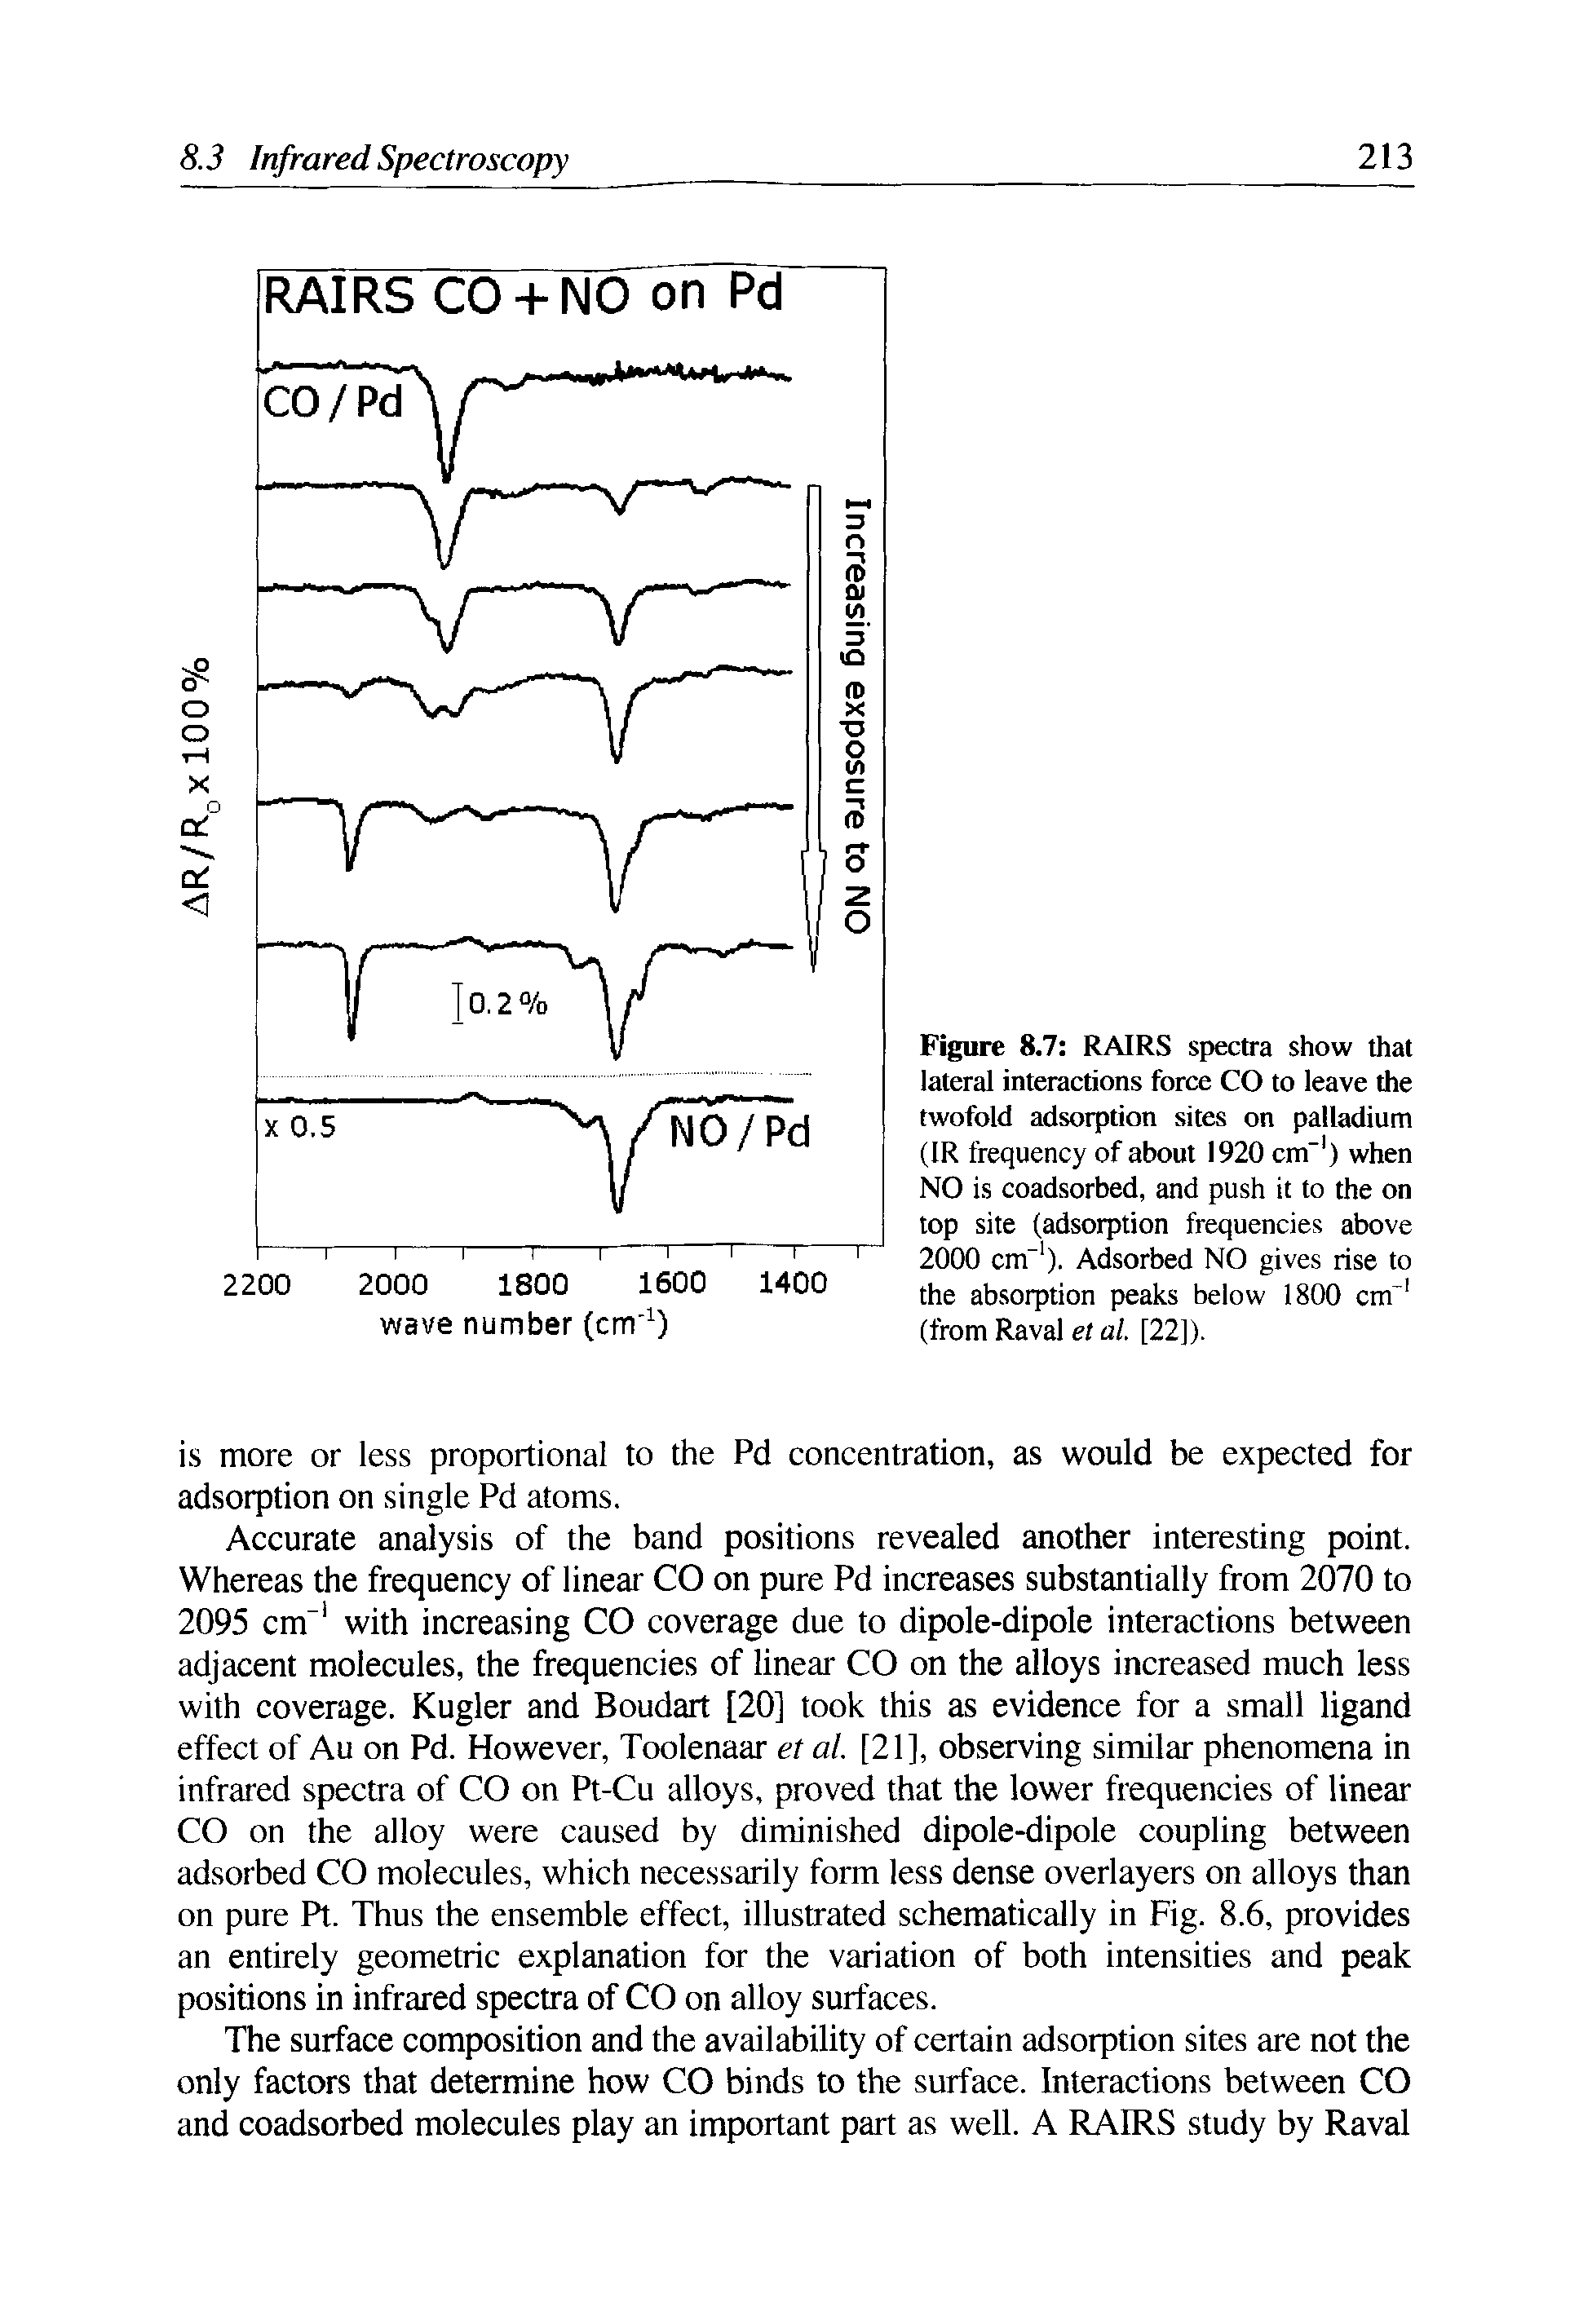 Figure 8.7 RAIRS spectra show that lateral interactions force CO to leave the twofold adsorption sites on palladium (IR frequency of about 1920 cm 1) when NO is coadsorbed, and push it to the on top site (adsorption frequencies above 2000 cm-1). Adsorbed NO gives rise to the absorption peaks below 1800 cm 1 (from Raval et al. [22]).